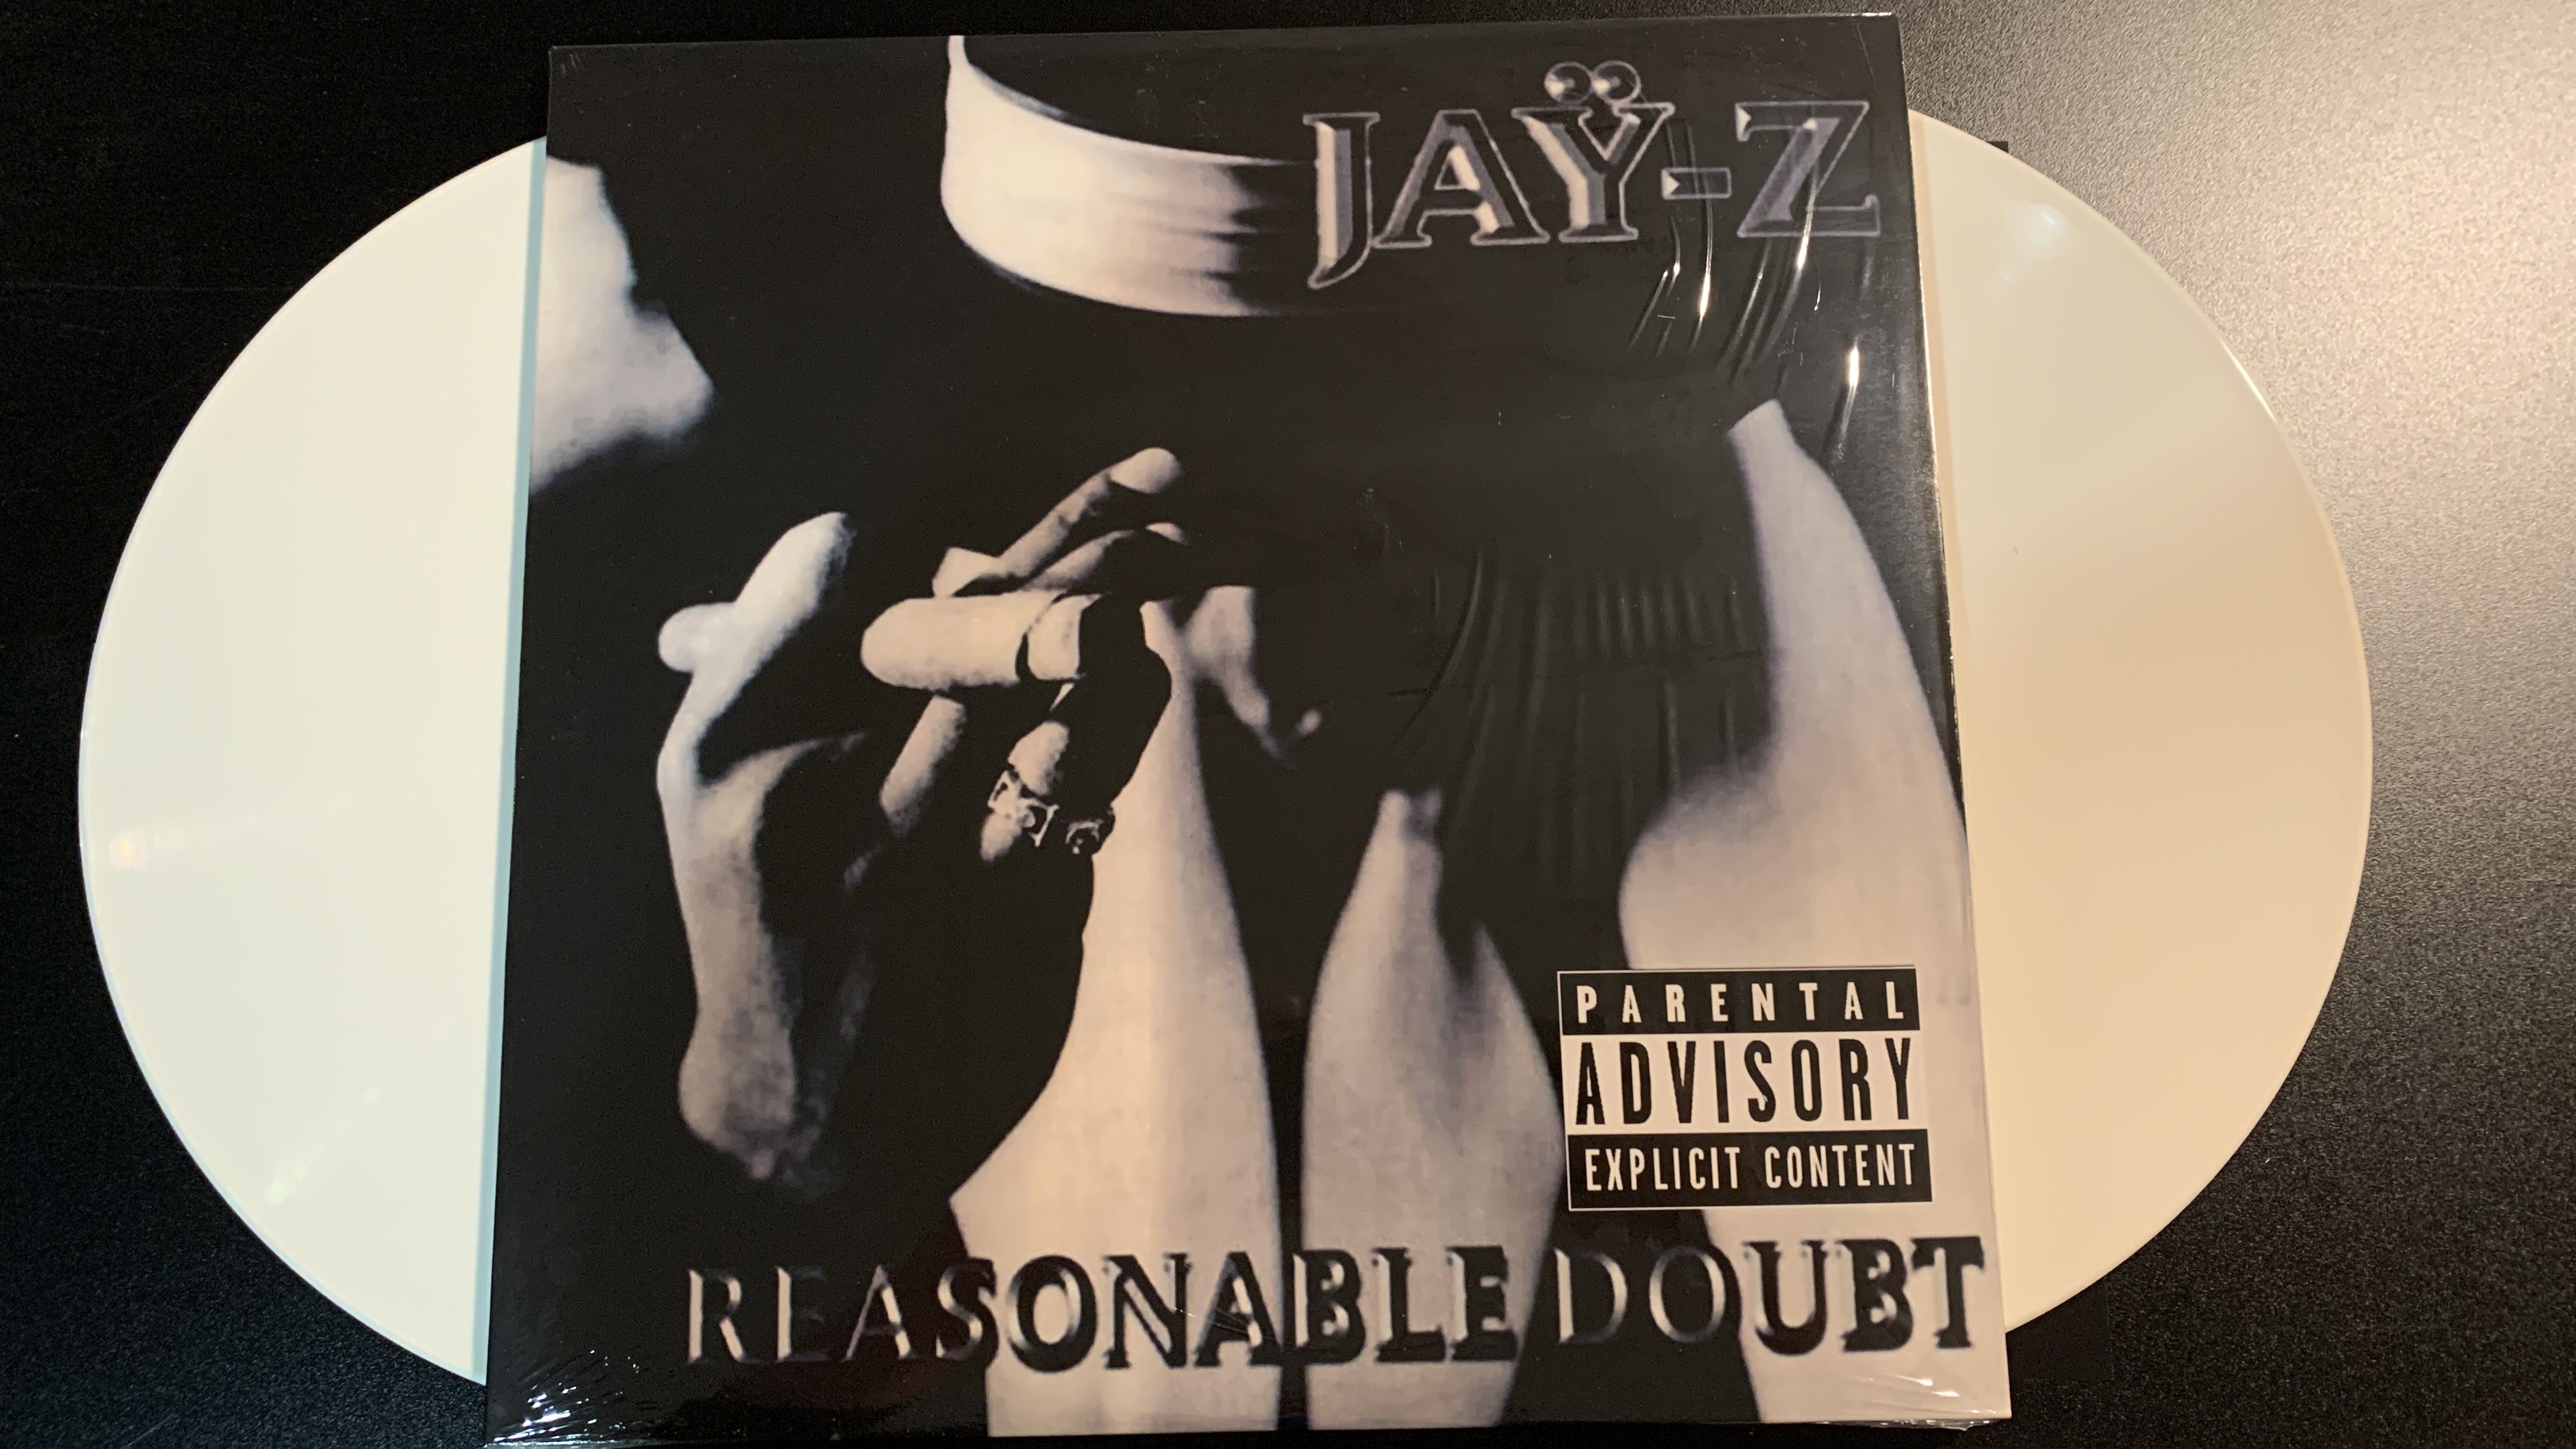 JAY Z , REASONABLE DOUBT, WHITE COLORED VINYL 2LP SET WITH INSERT, IMPORT